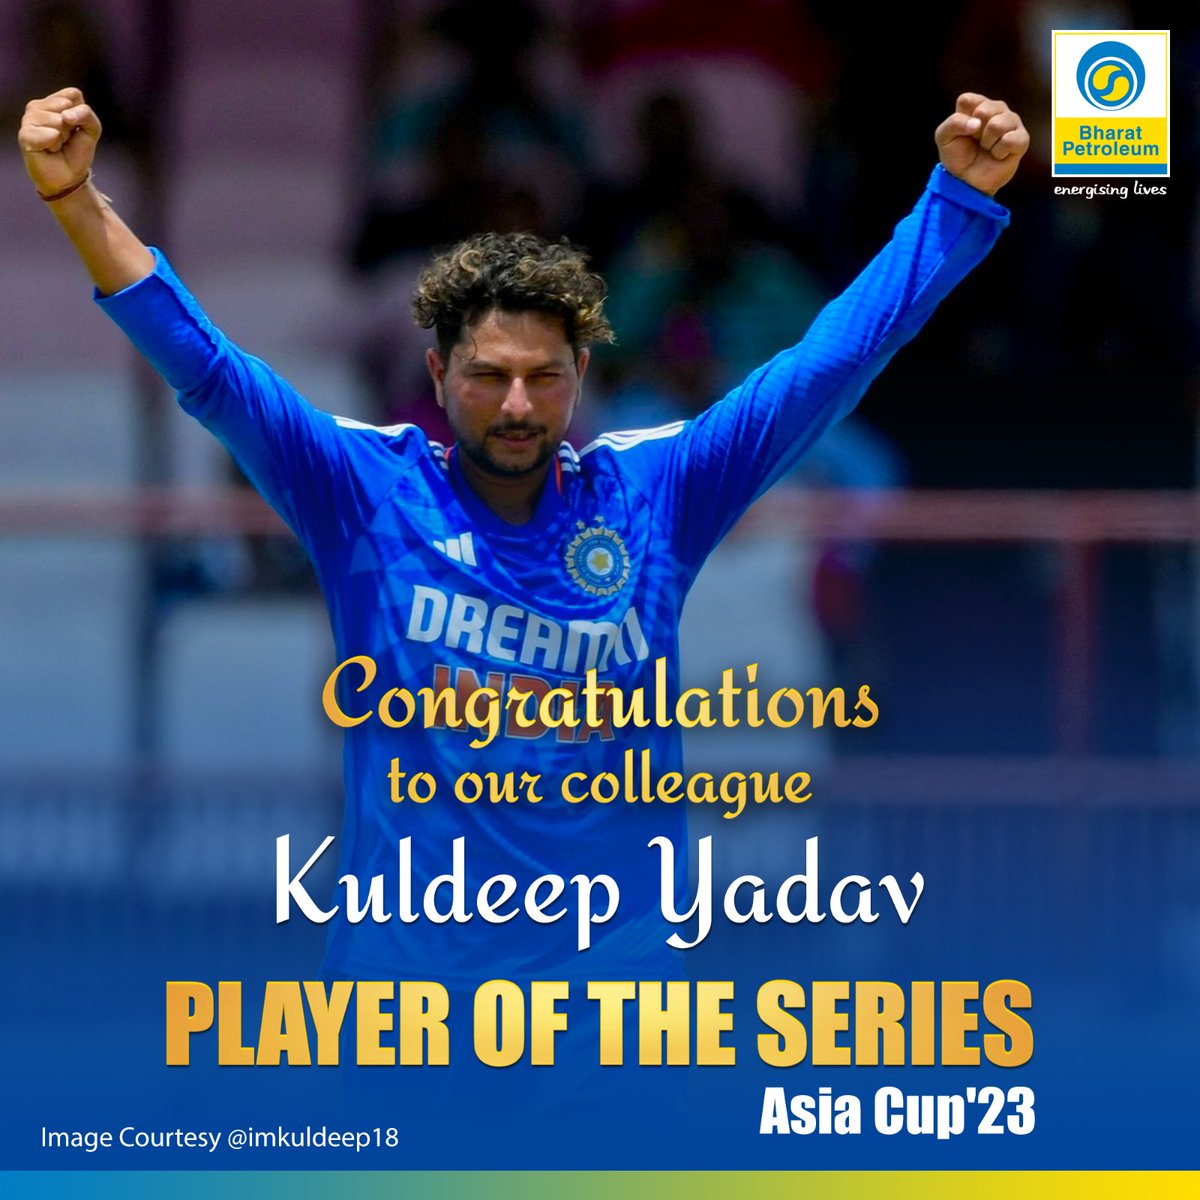 A big shout out to our collegue Kuldeep Yadav in winning ‘Player of the Series’ at #AsiaCup2023 His dedication, sportsmanship, and remarkable performance, are true reflection of the BPCL spirit. #AsiaCupChampions #TeamIndia #RahulDravid #KuldeepYadav #CricketGlory #AsiaCup23